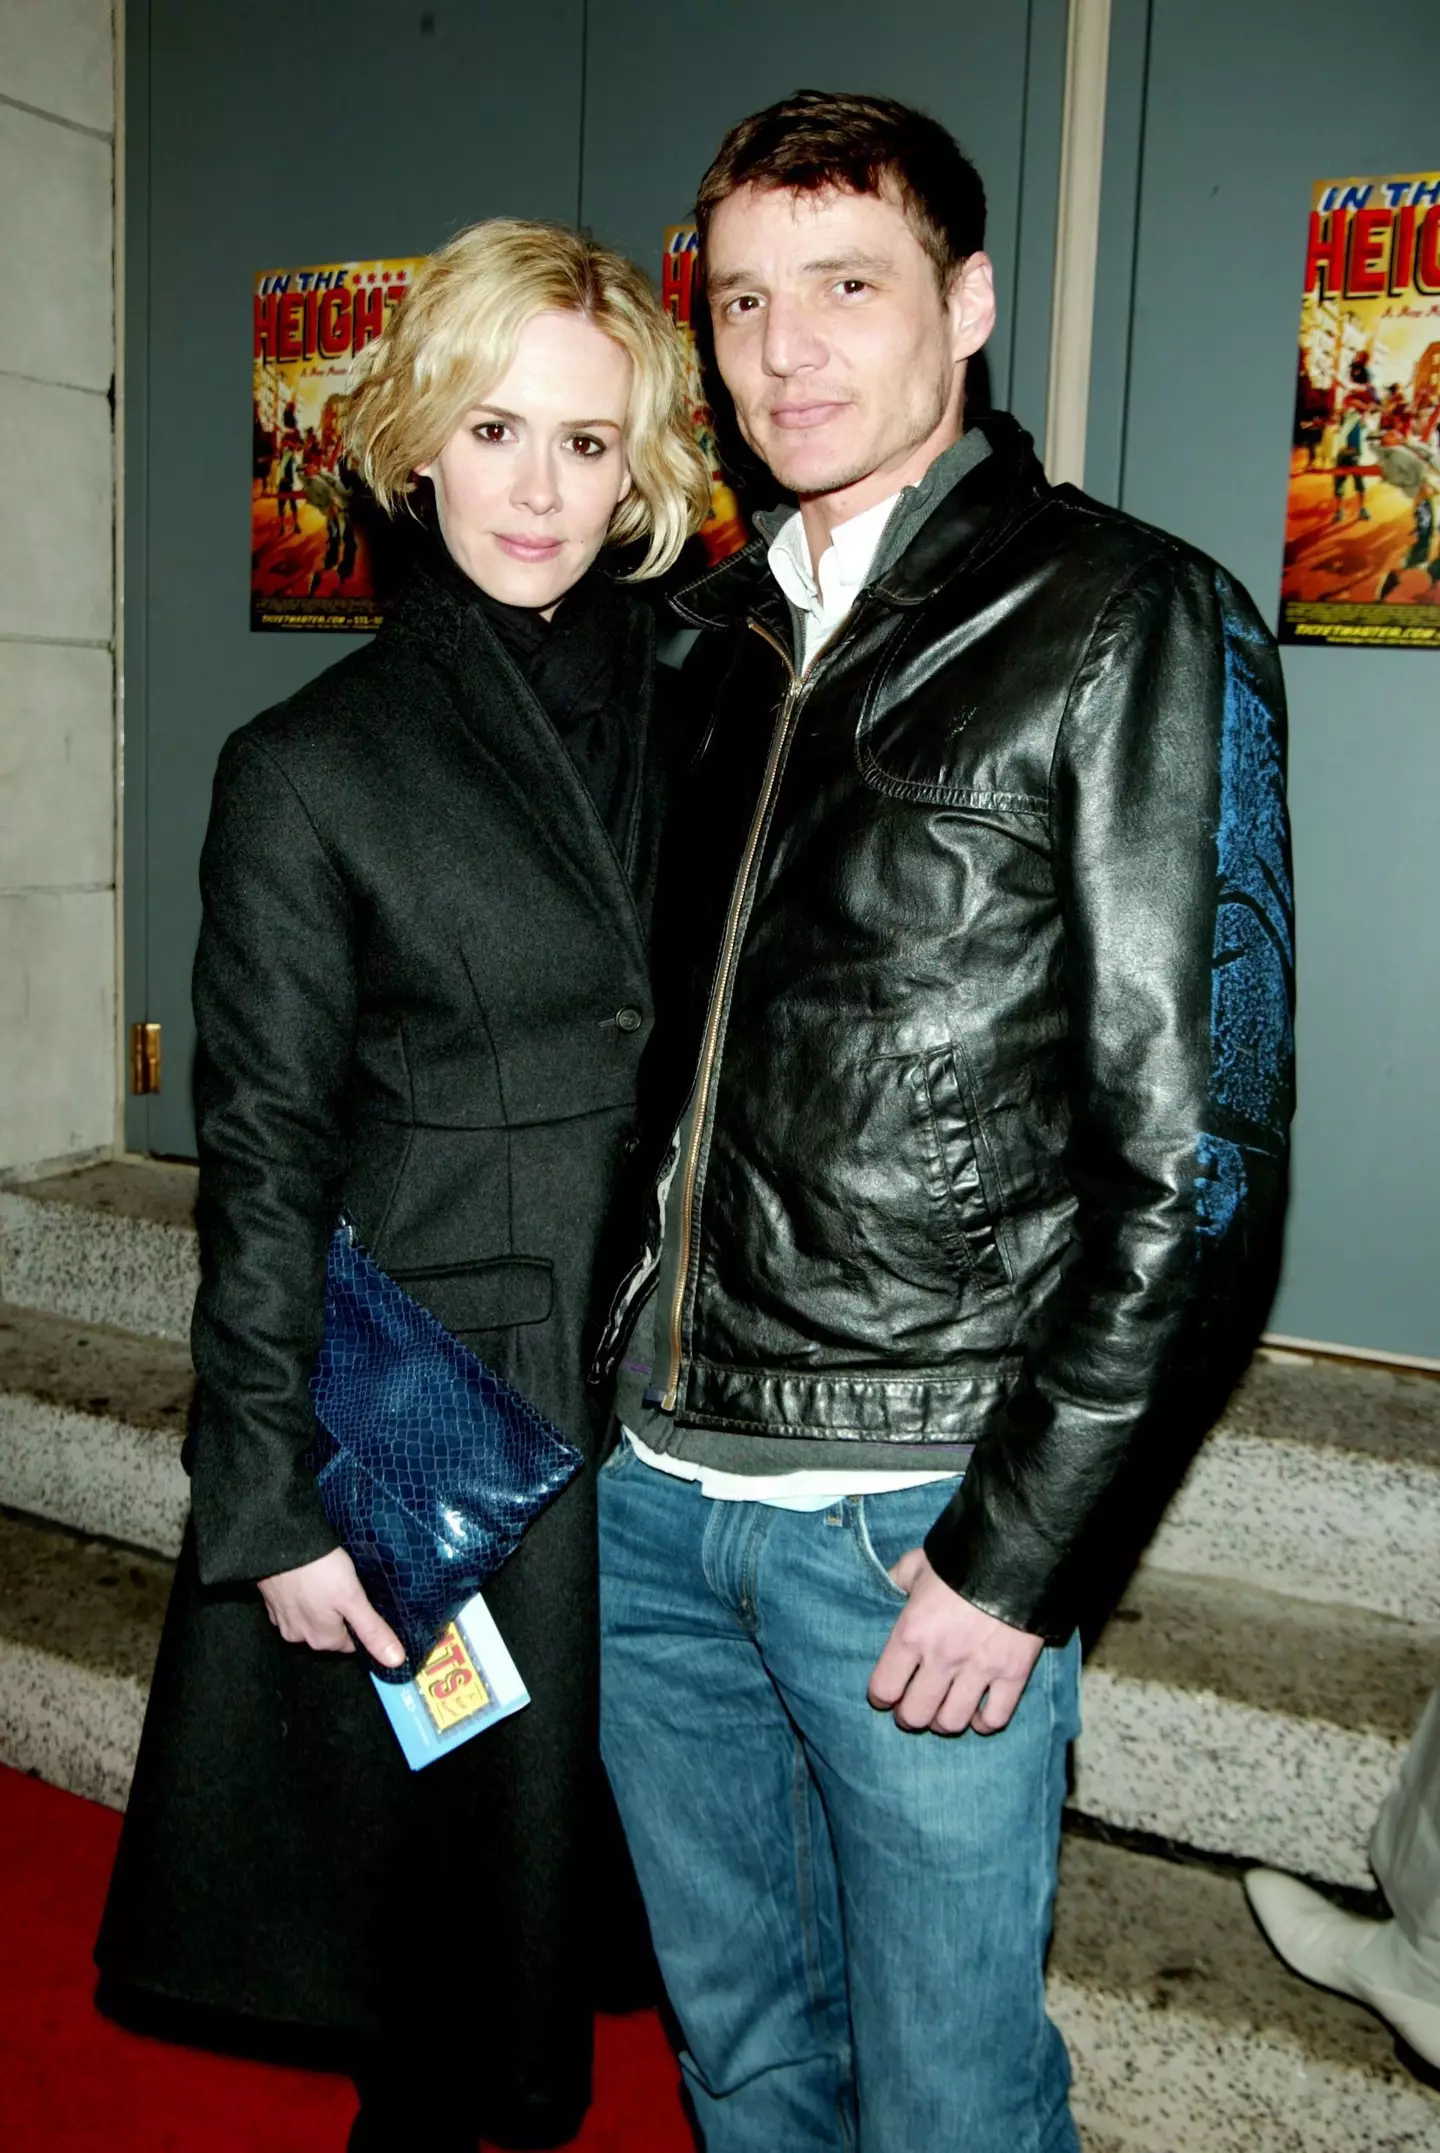 Sarah Paulson helped Pedro Pascal out in the early days.